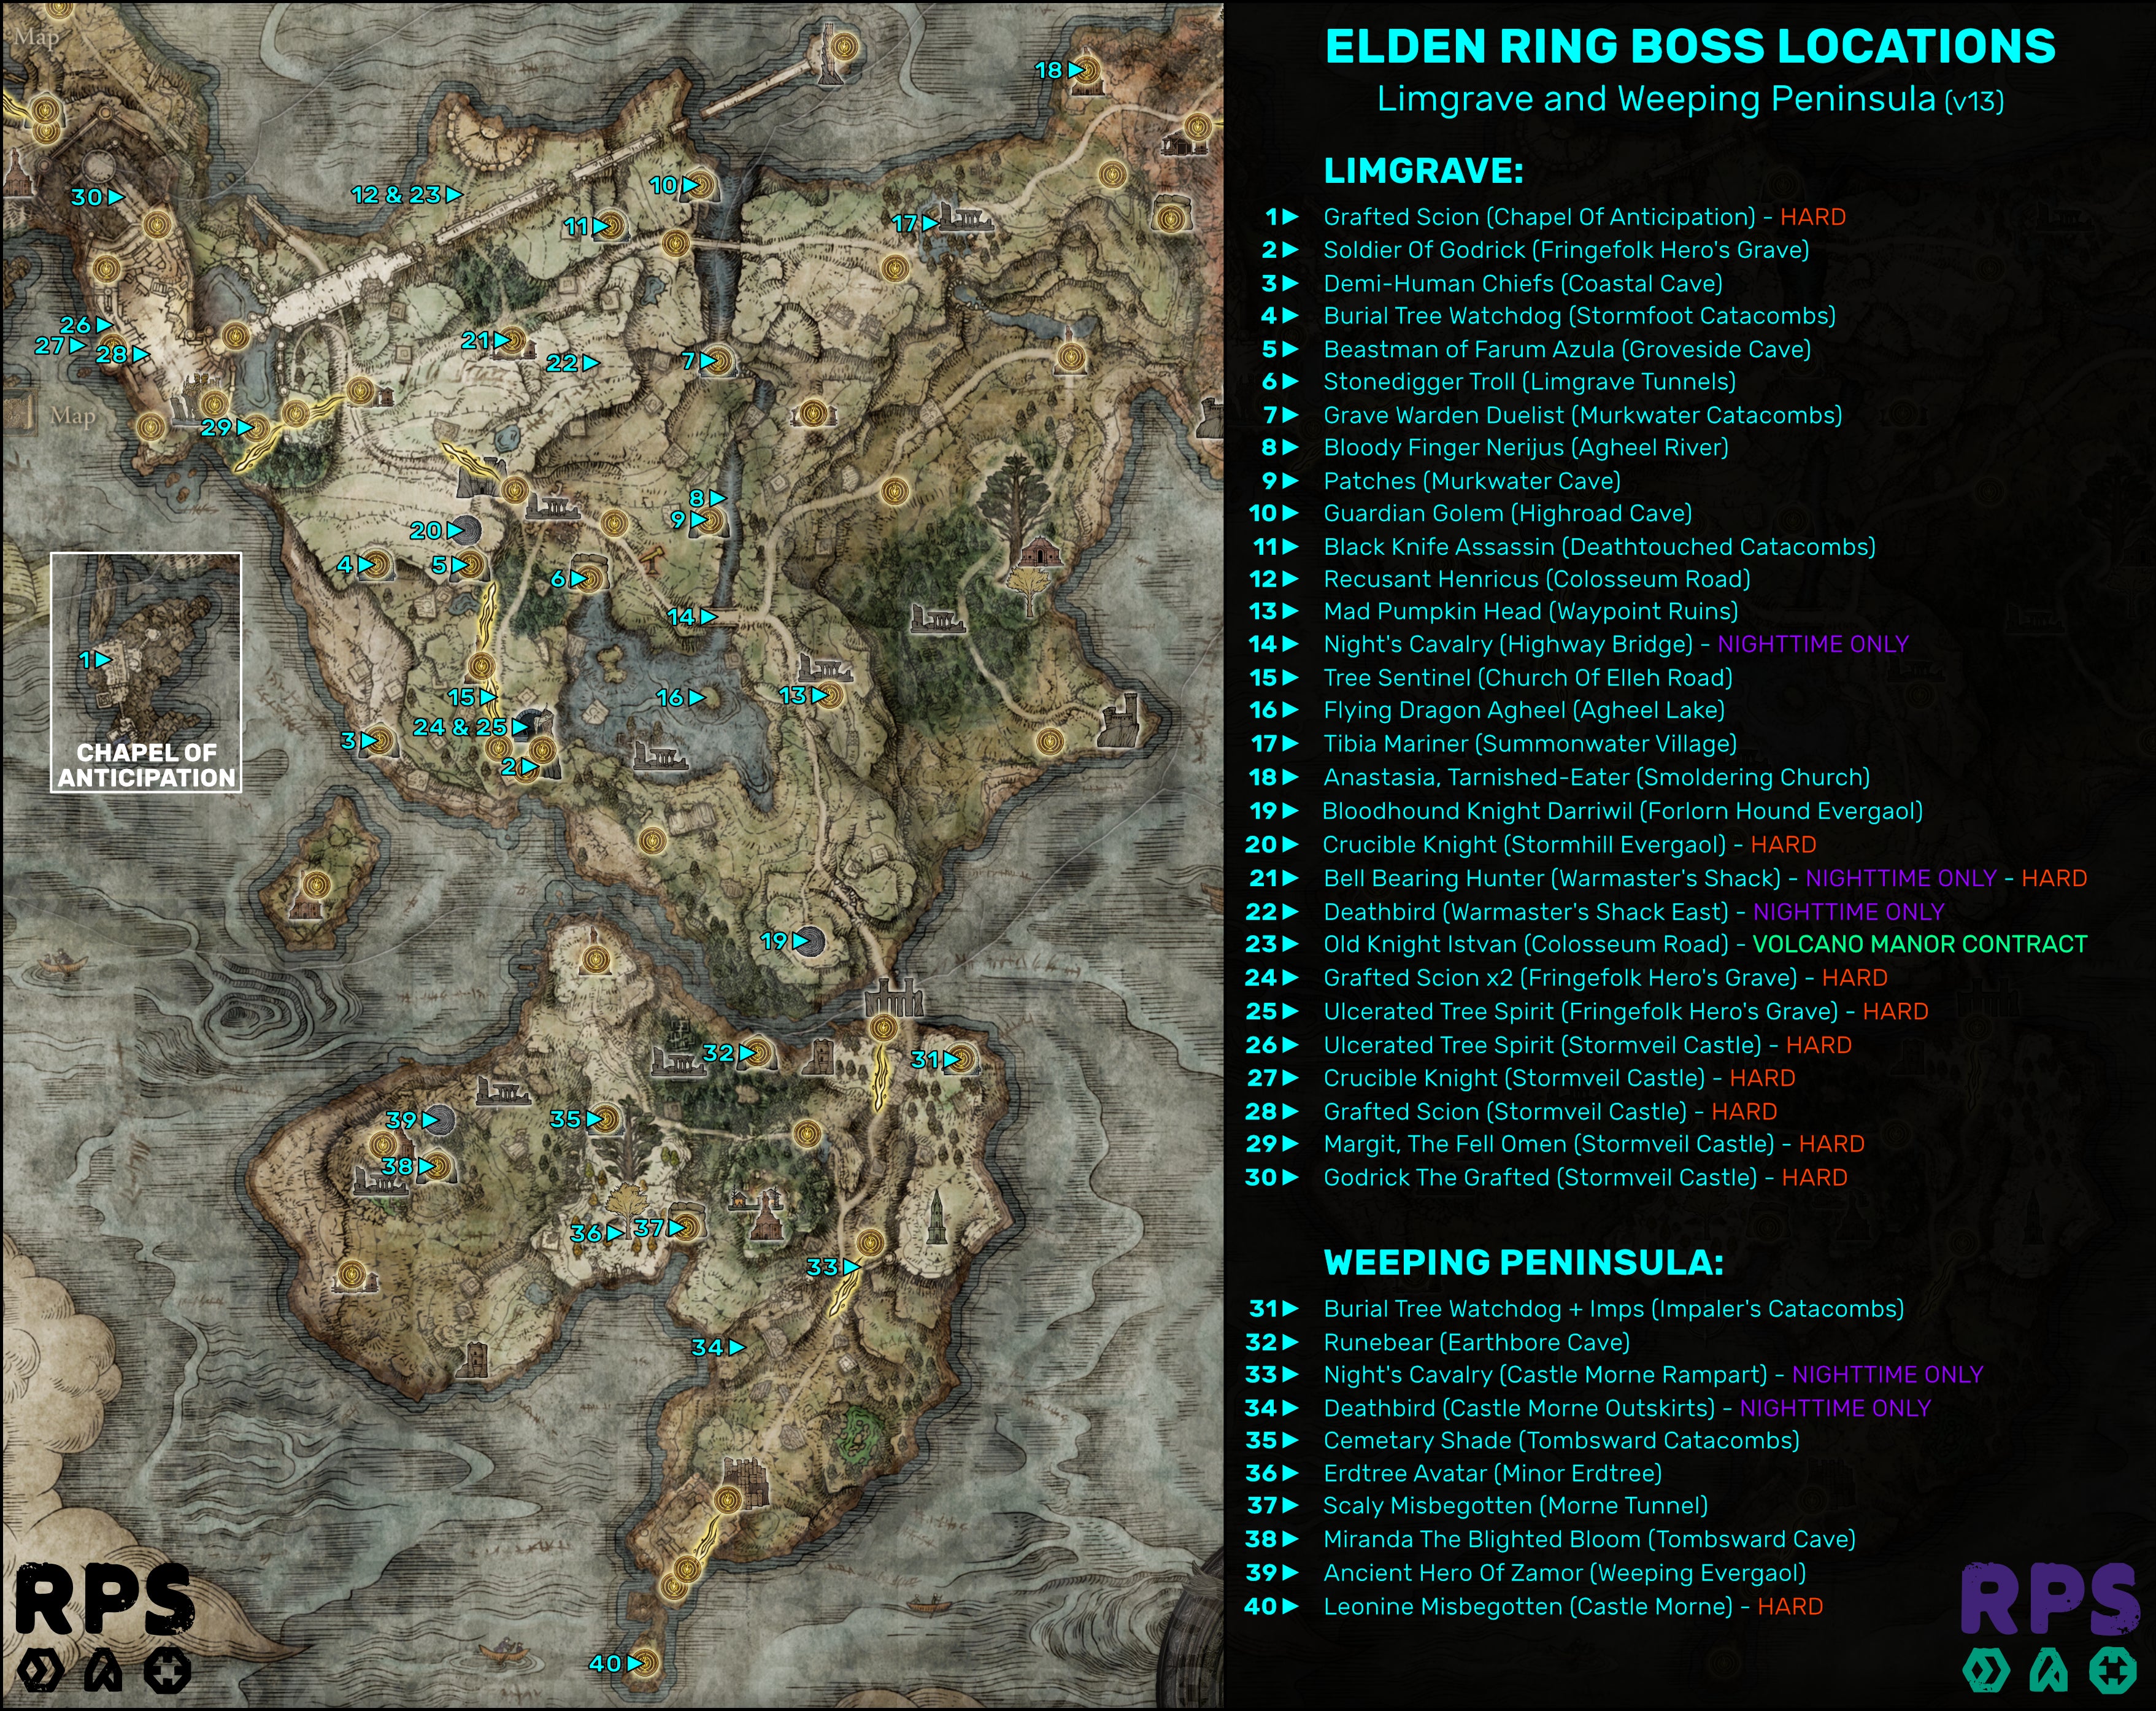 A map of Limgrave and the Weeping Peninsula in Elden Ring, with the locations of every single boss encounter marked and numbered.